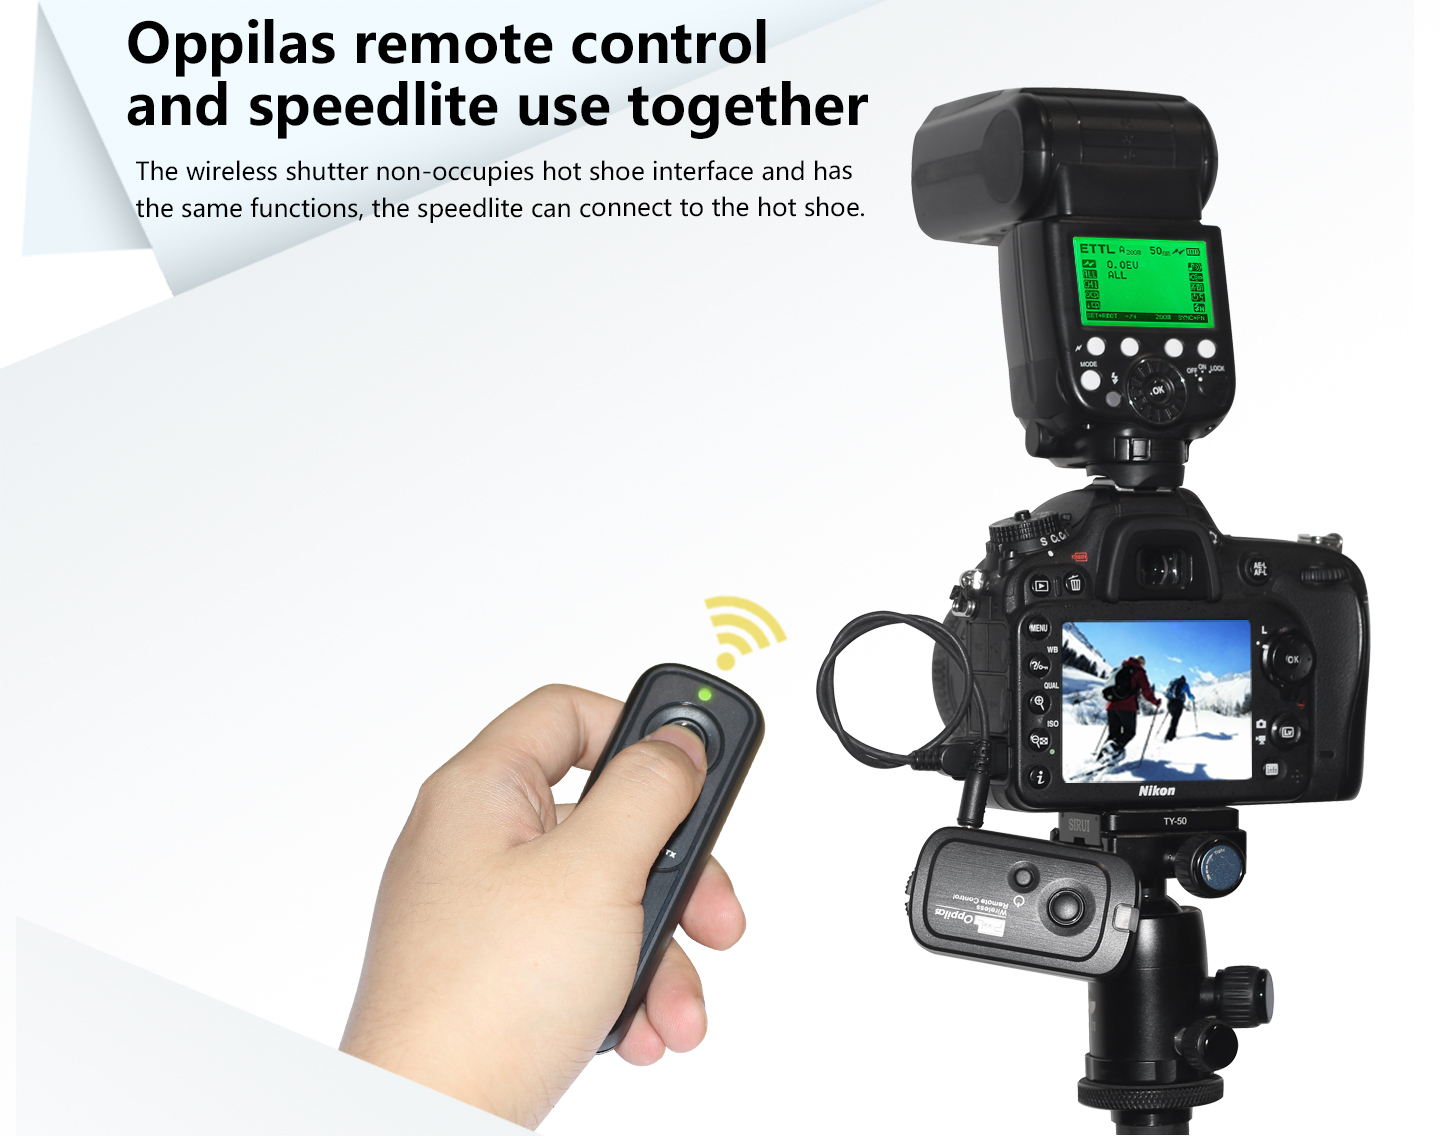 Oppilas remote control and speedlite use together